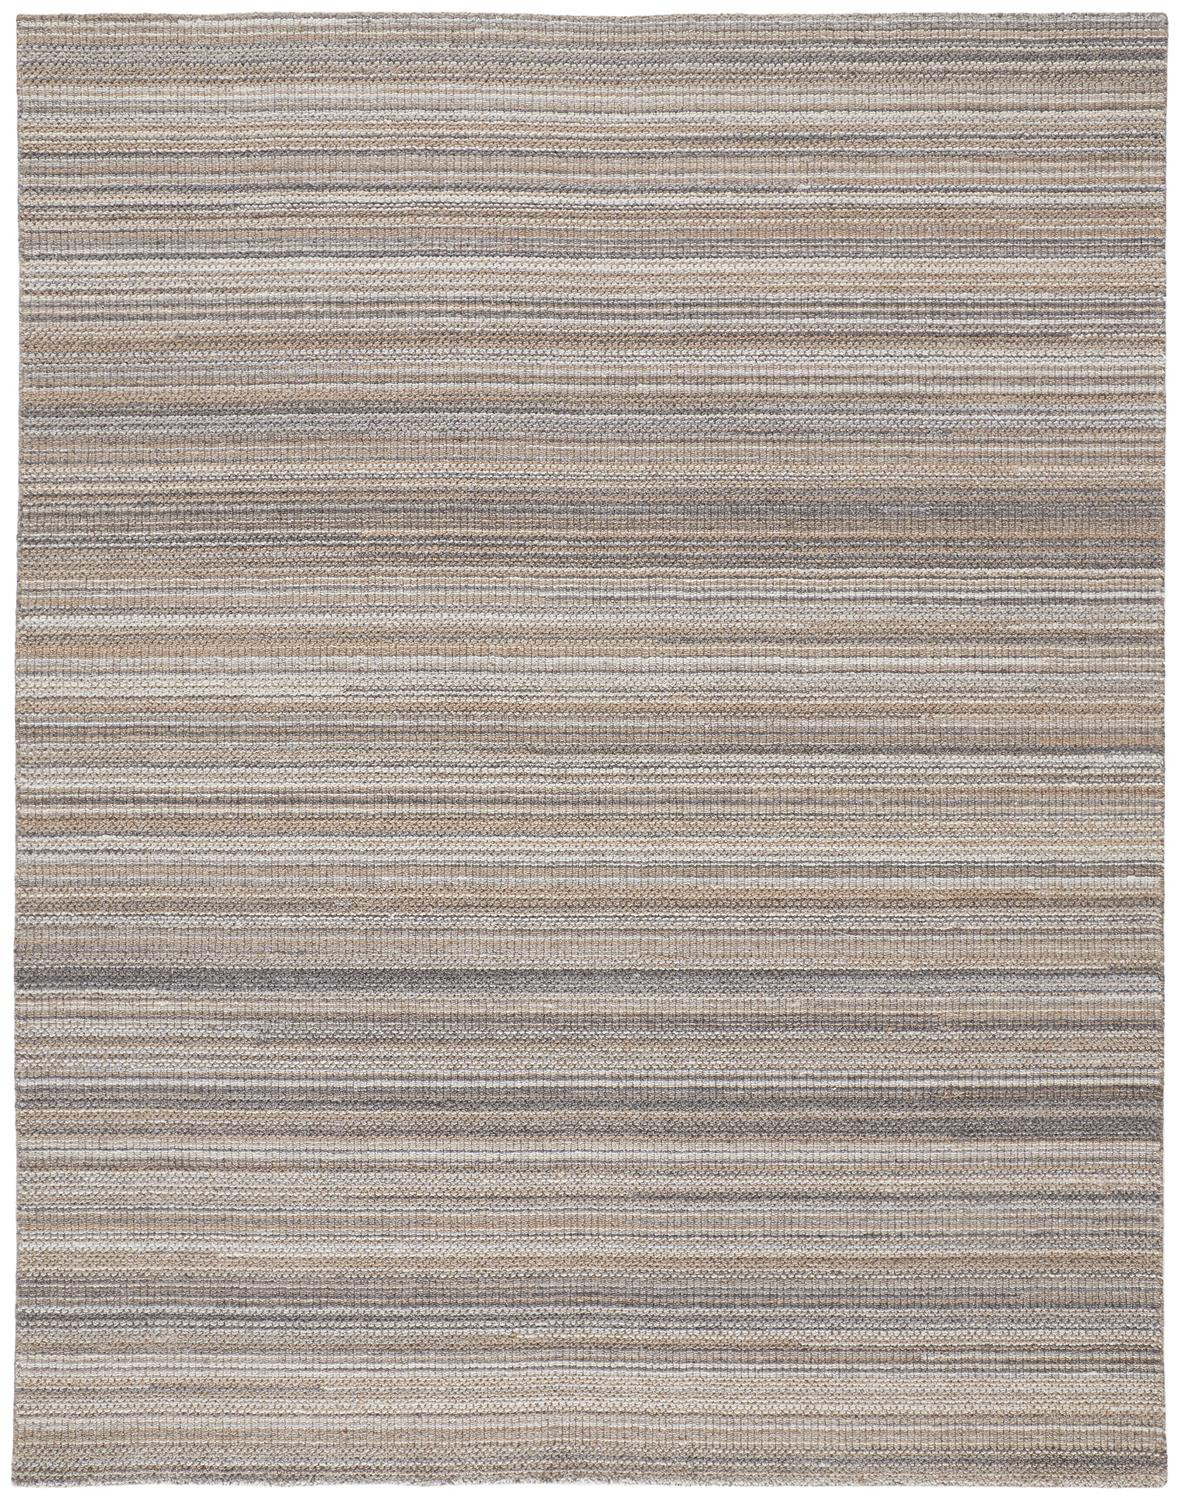 2' X 3' Brown And Taupe Wool Hand Woven Stain Resistant Area Rug-514055-1